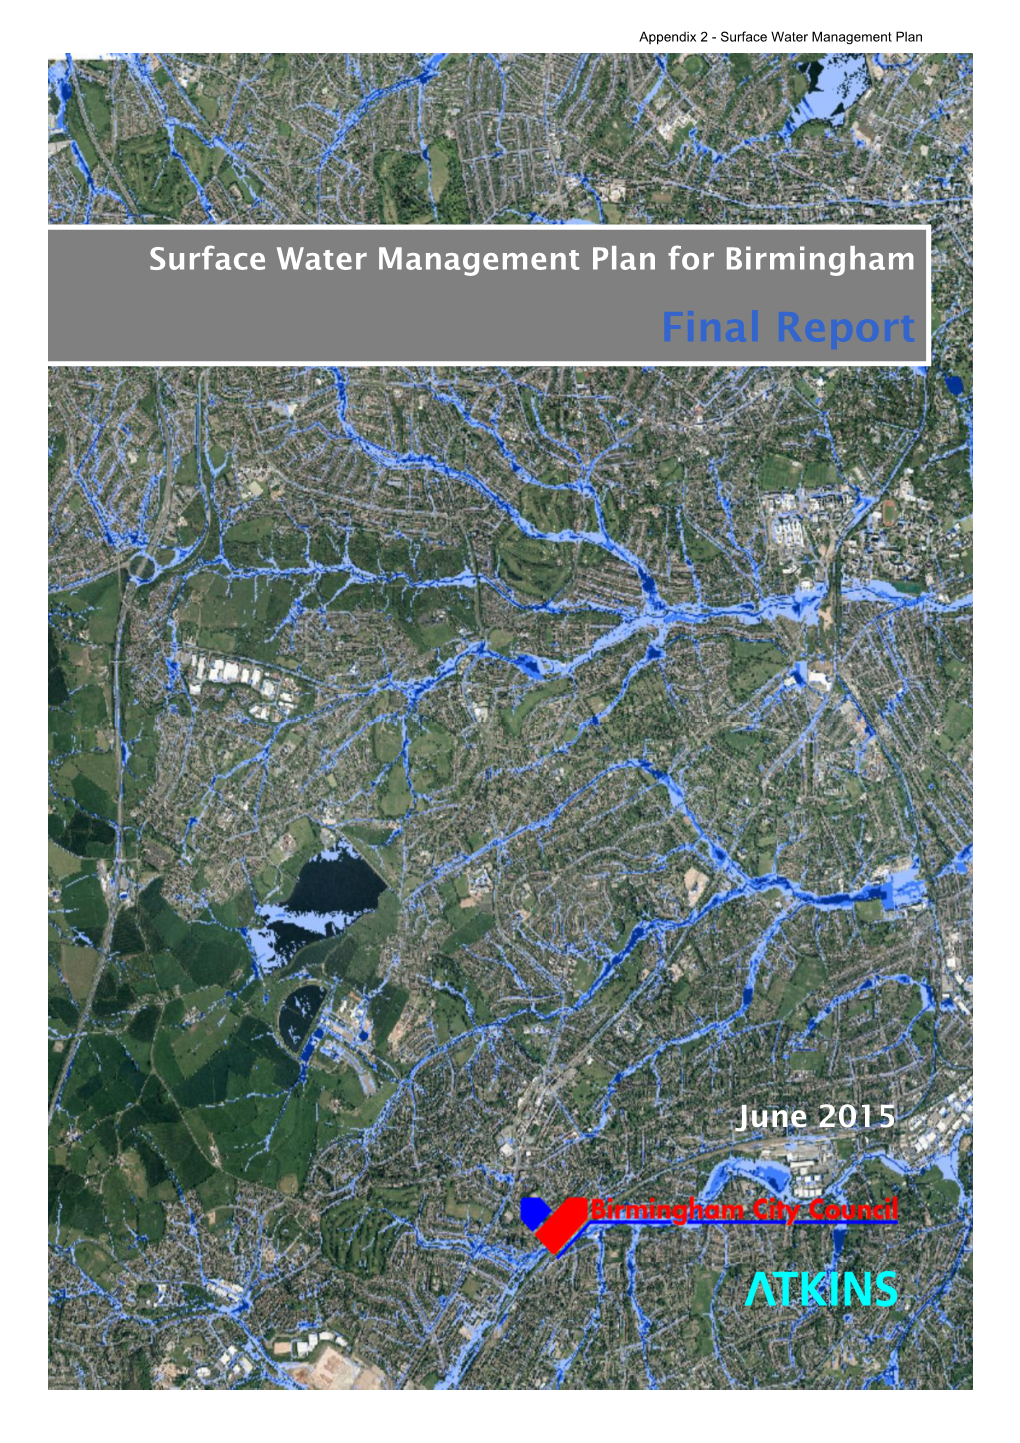 Assessment of Surface Water Flood Risk 4.1. Introduction